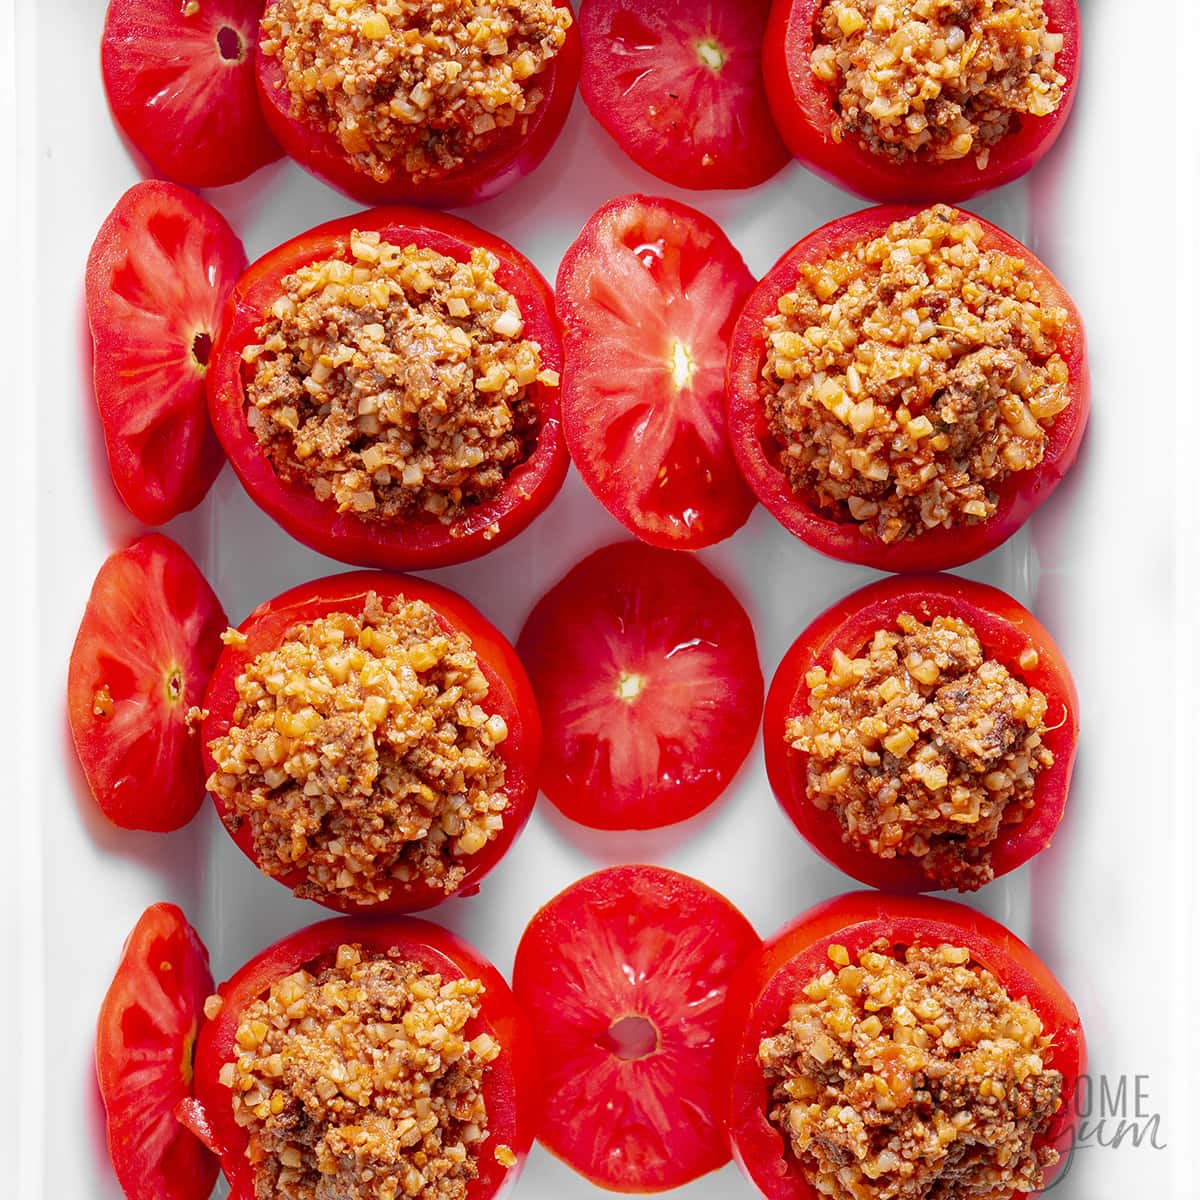 Tomatoes stuffed with ground beef mixture.